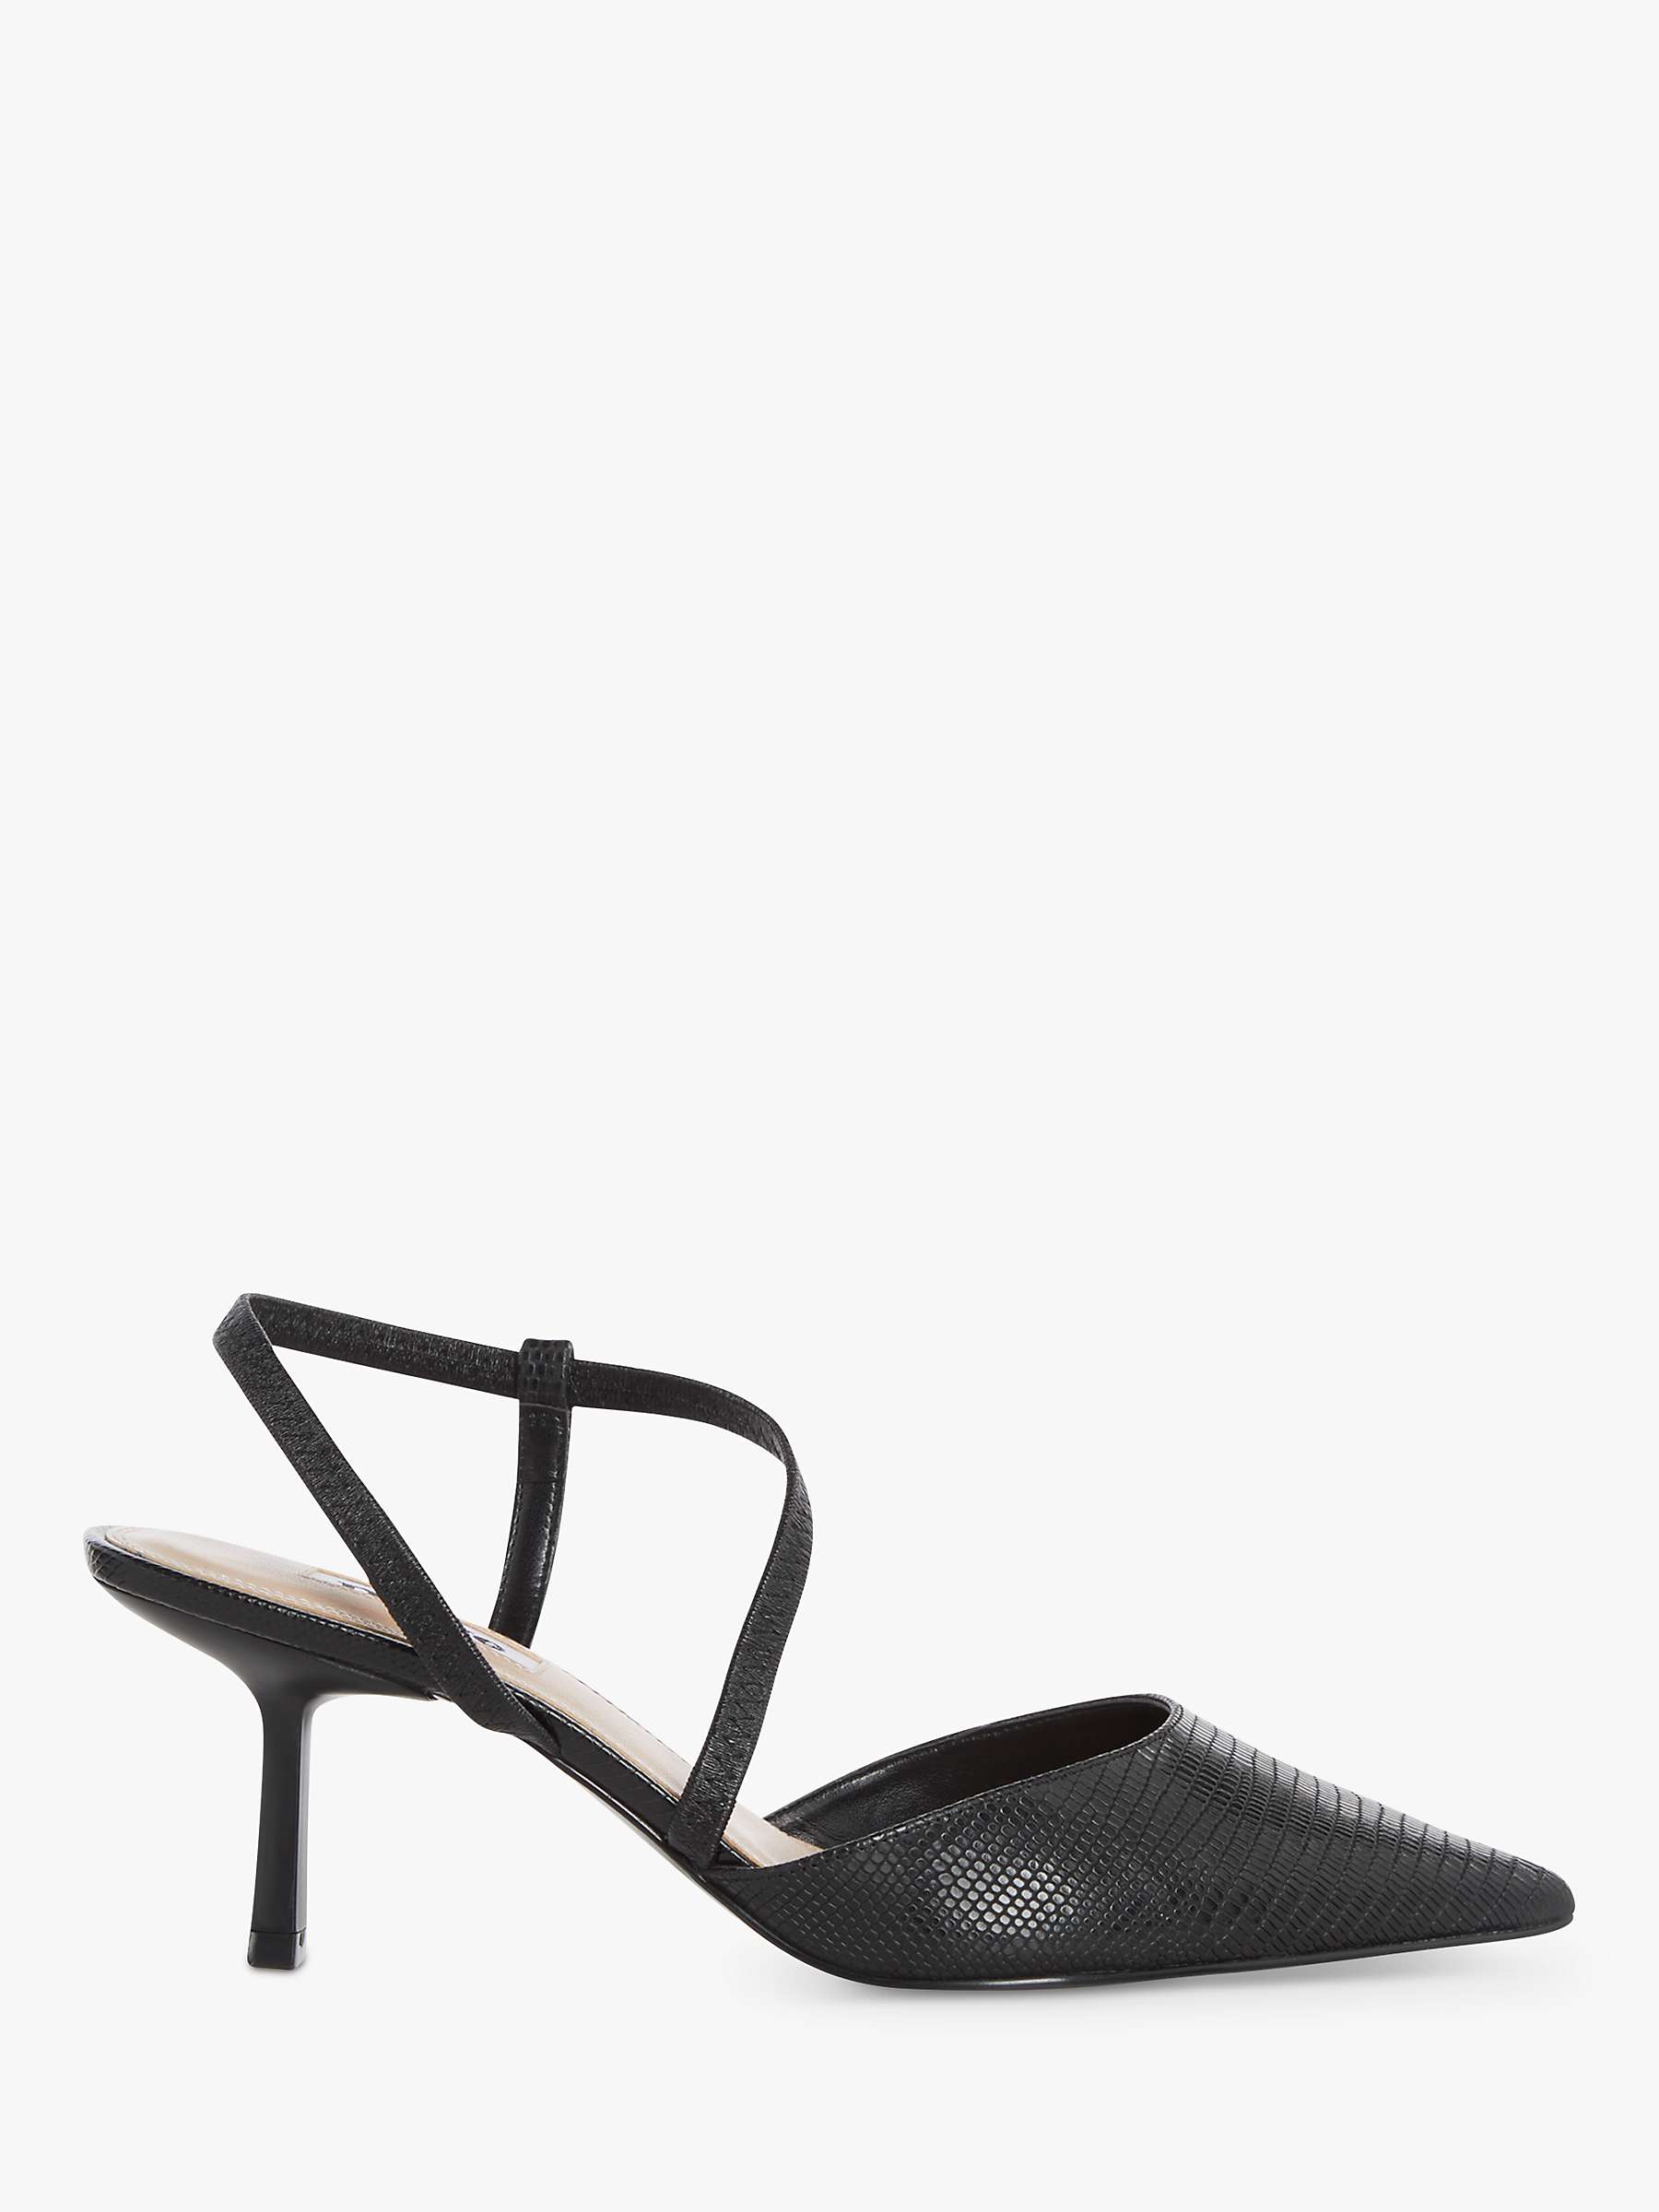 Buy Dune Columbia Leather Court Shoes, Black Online at johnlewis.com